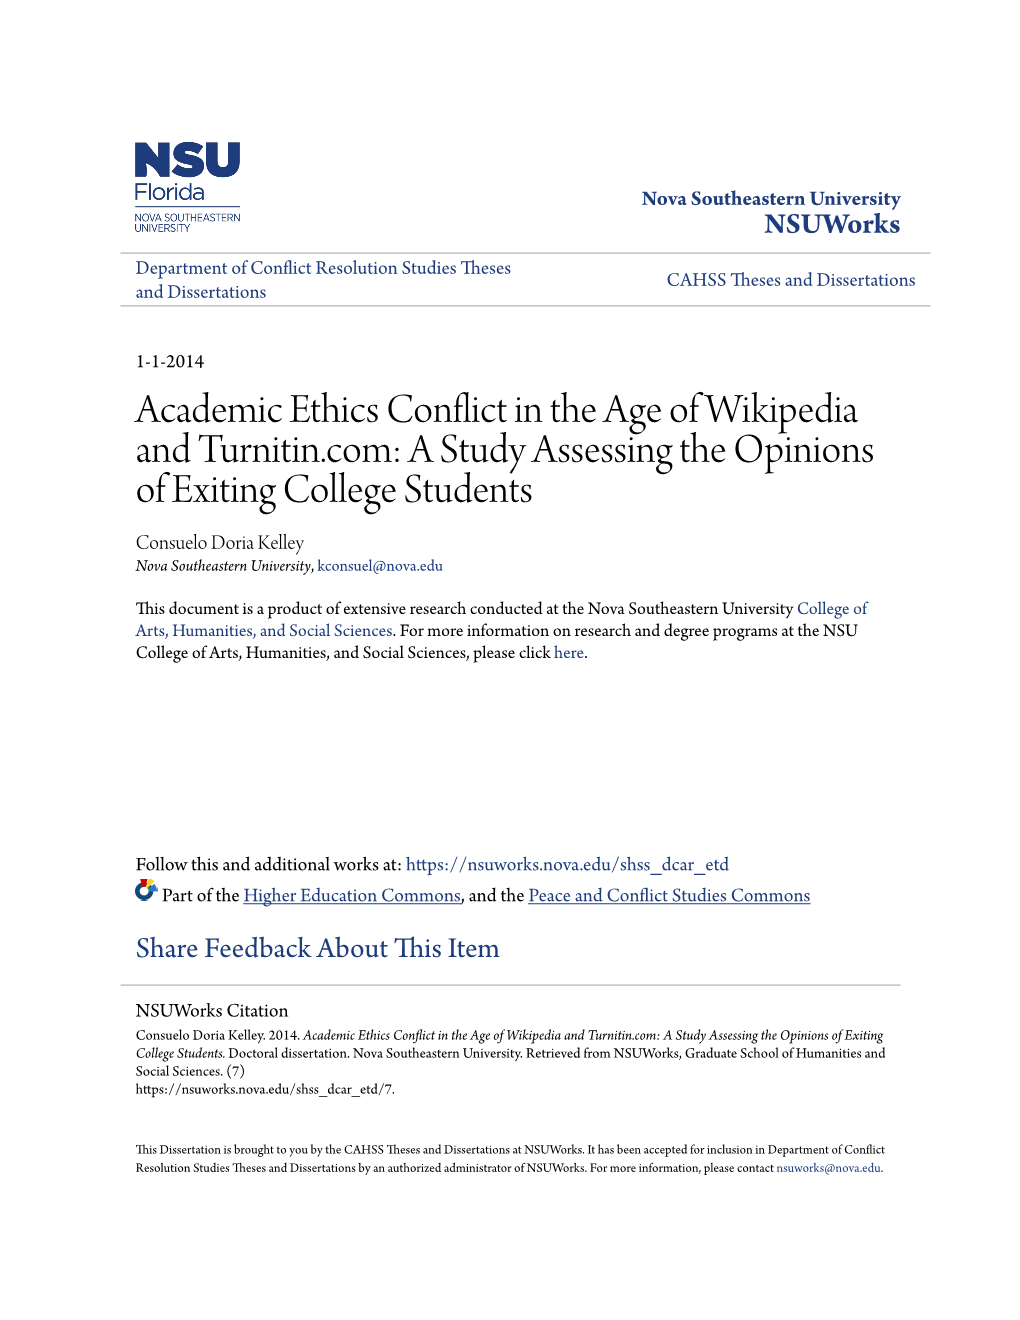 Academic Ethics Conflict in the Age of Wikipedia and Turnitin